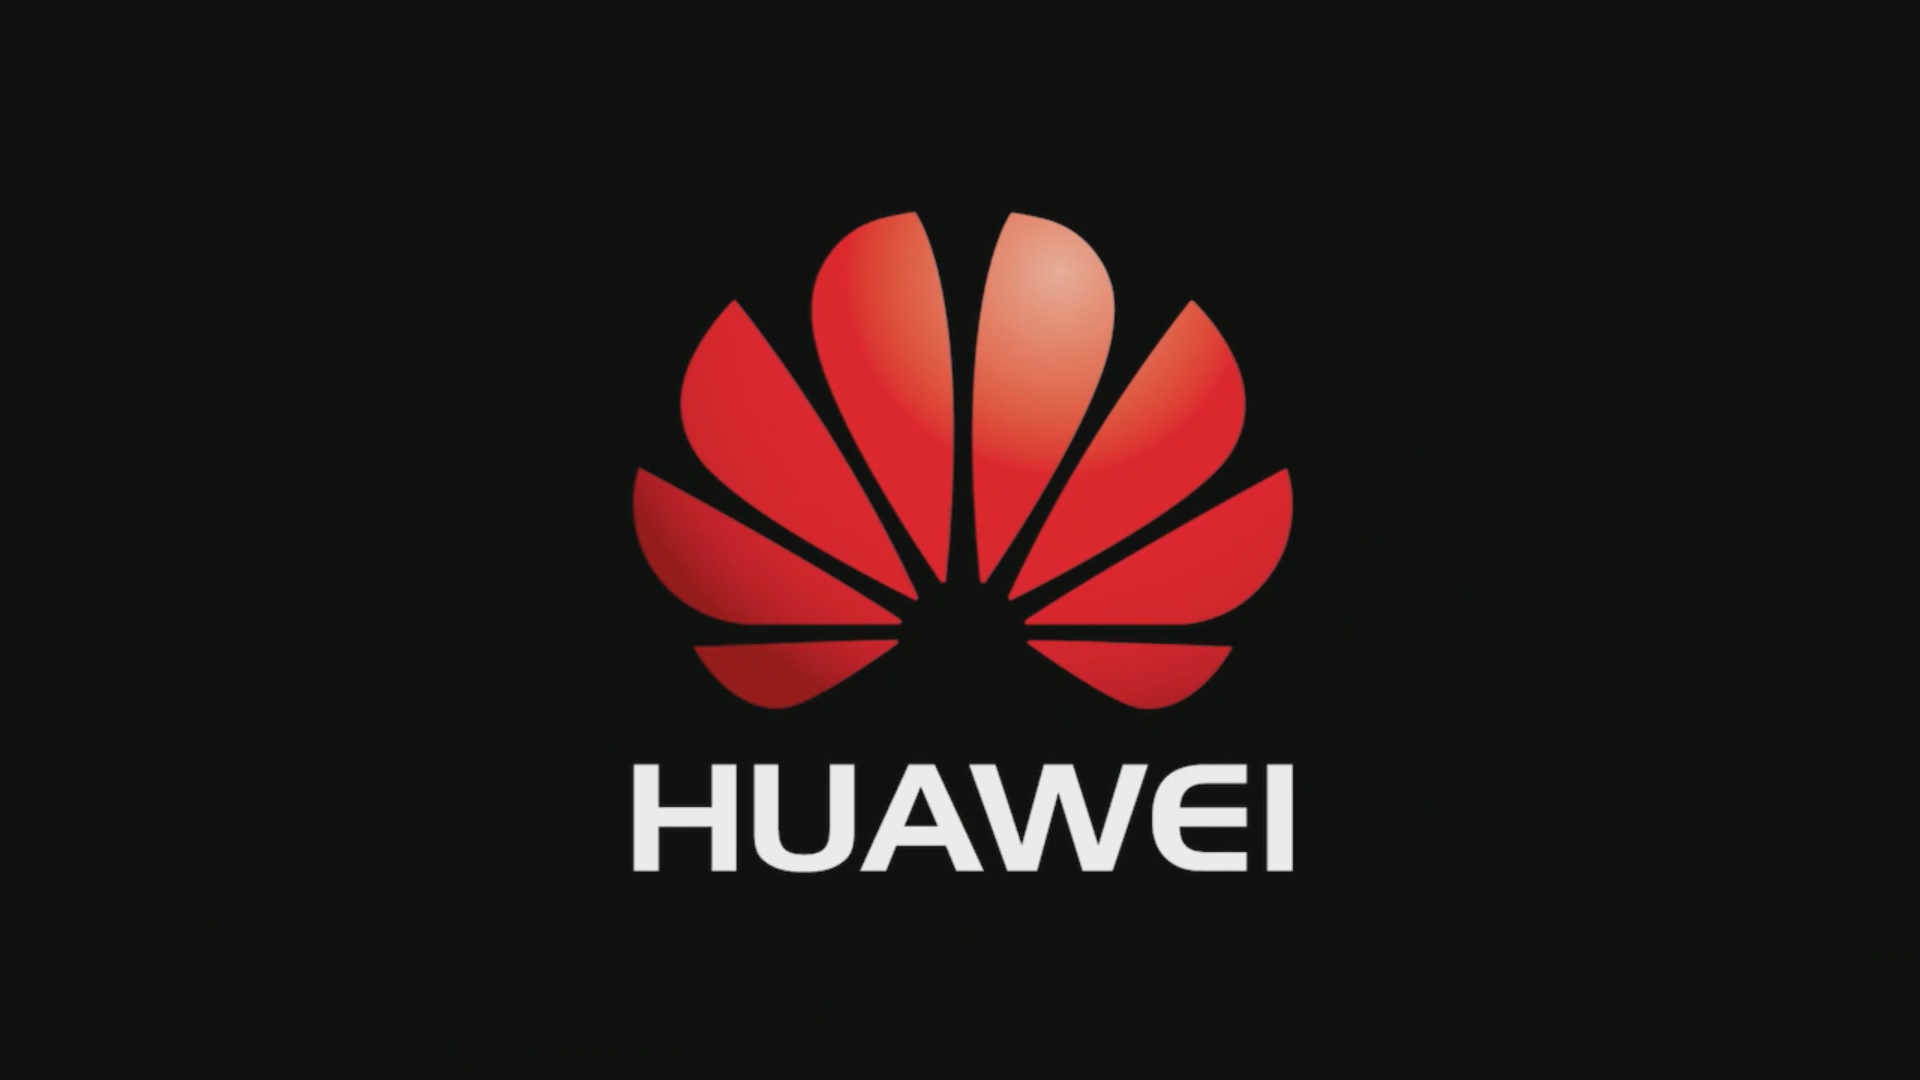 Fixed - Sound Not Works on Huawei P30 Pro